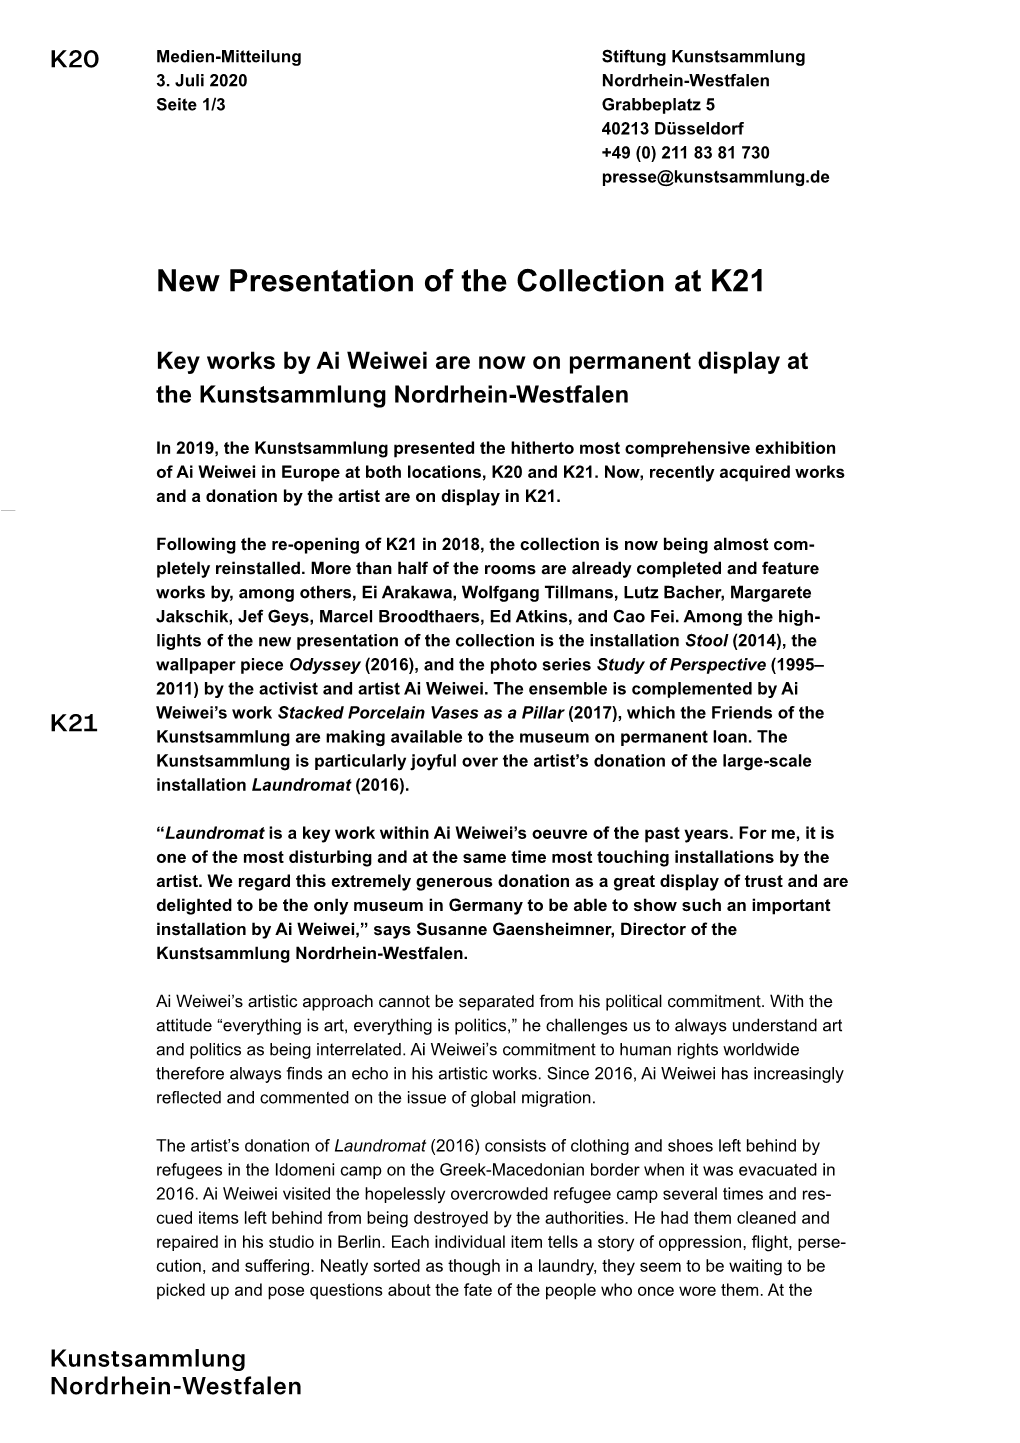 New Presentation of the Collection at K21